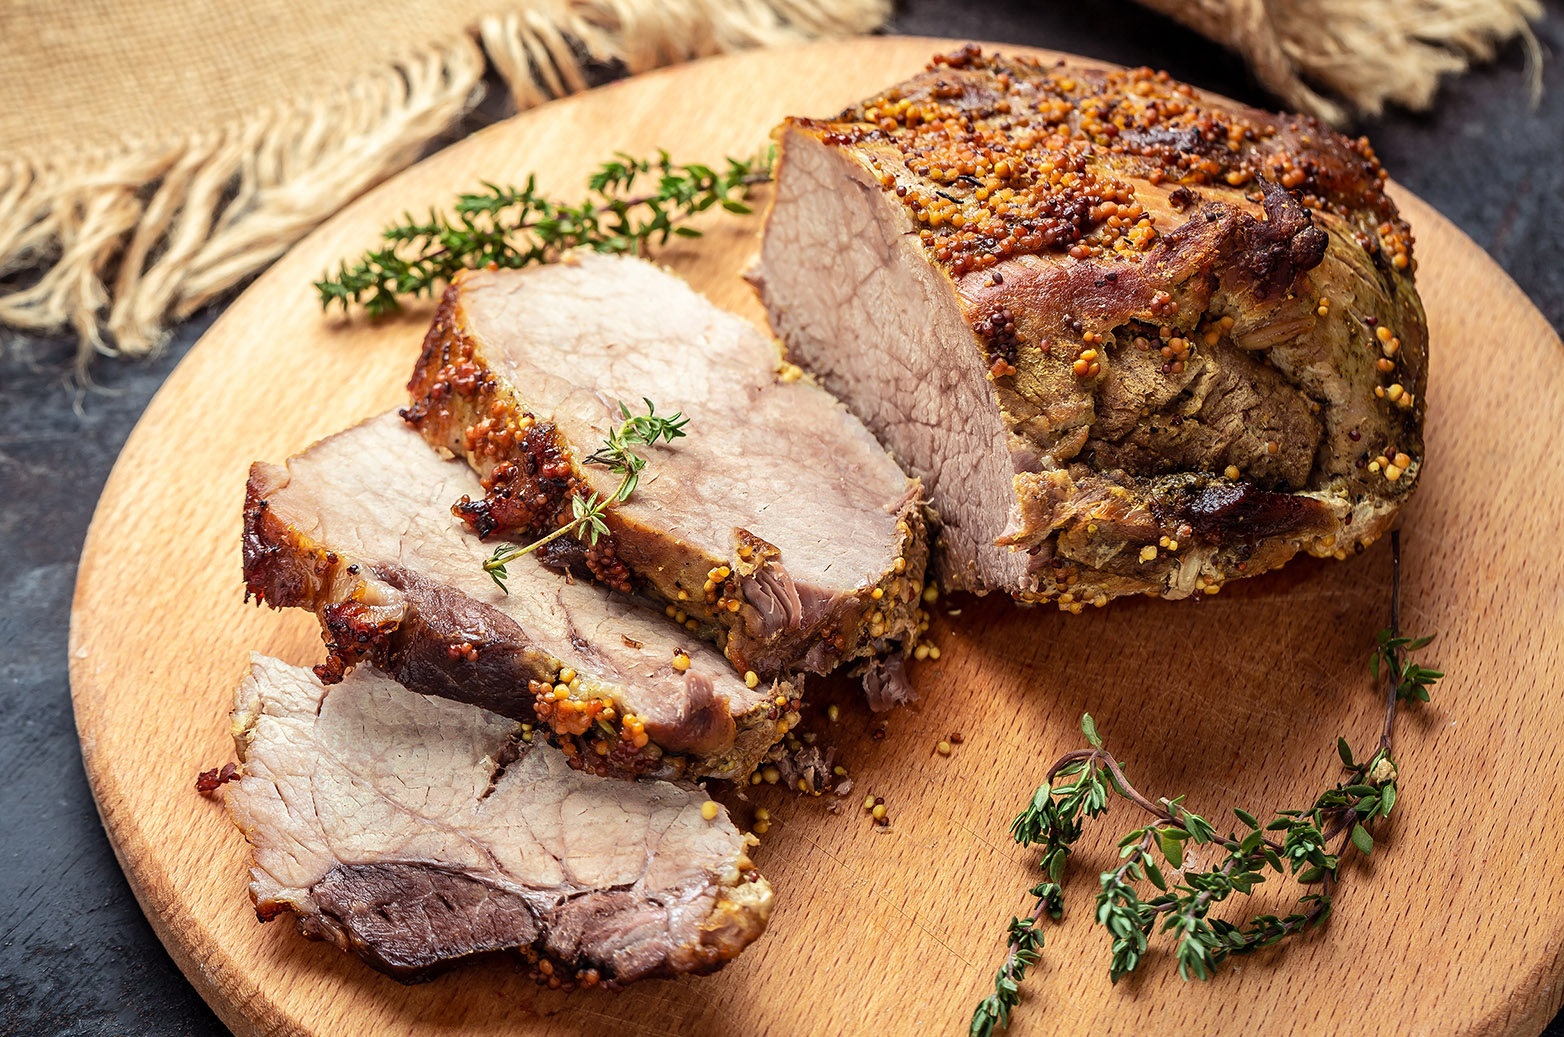 Large sliced piece of baked pork back wwith mustard and thyme on a wooden board. Food recipe background. Close up